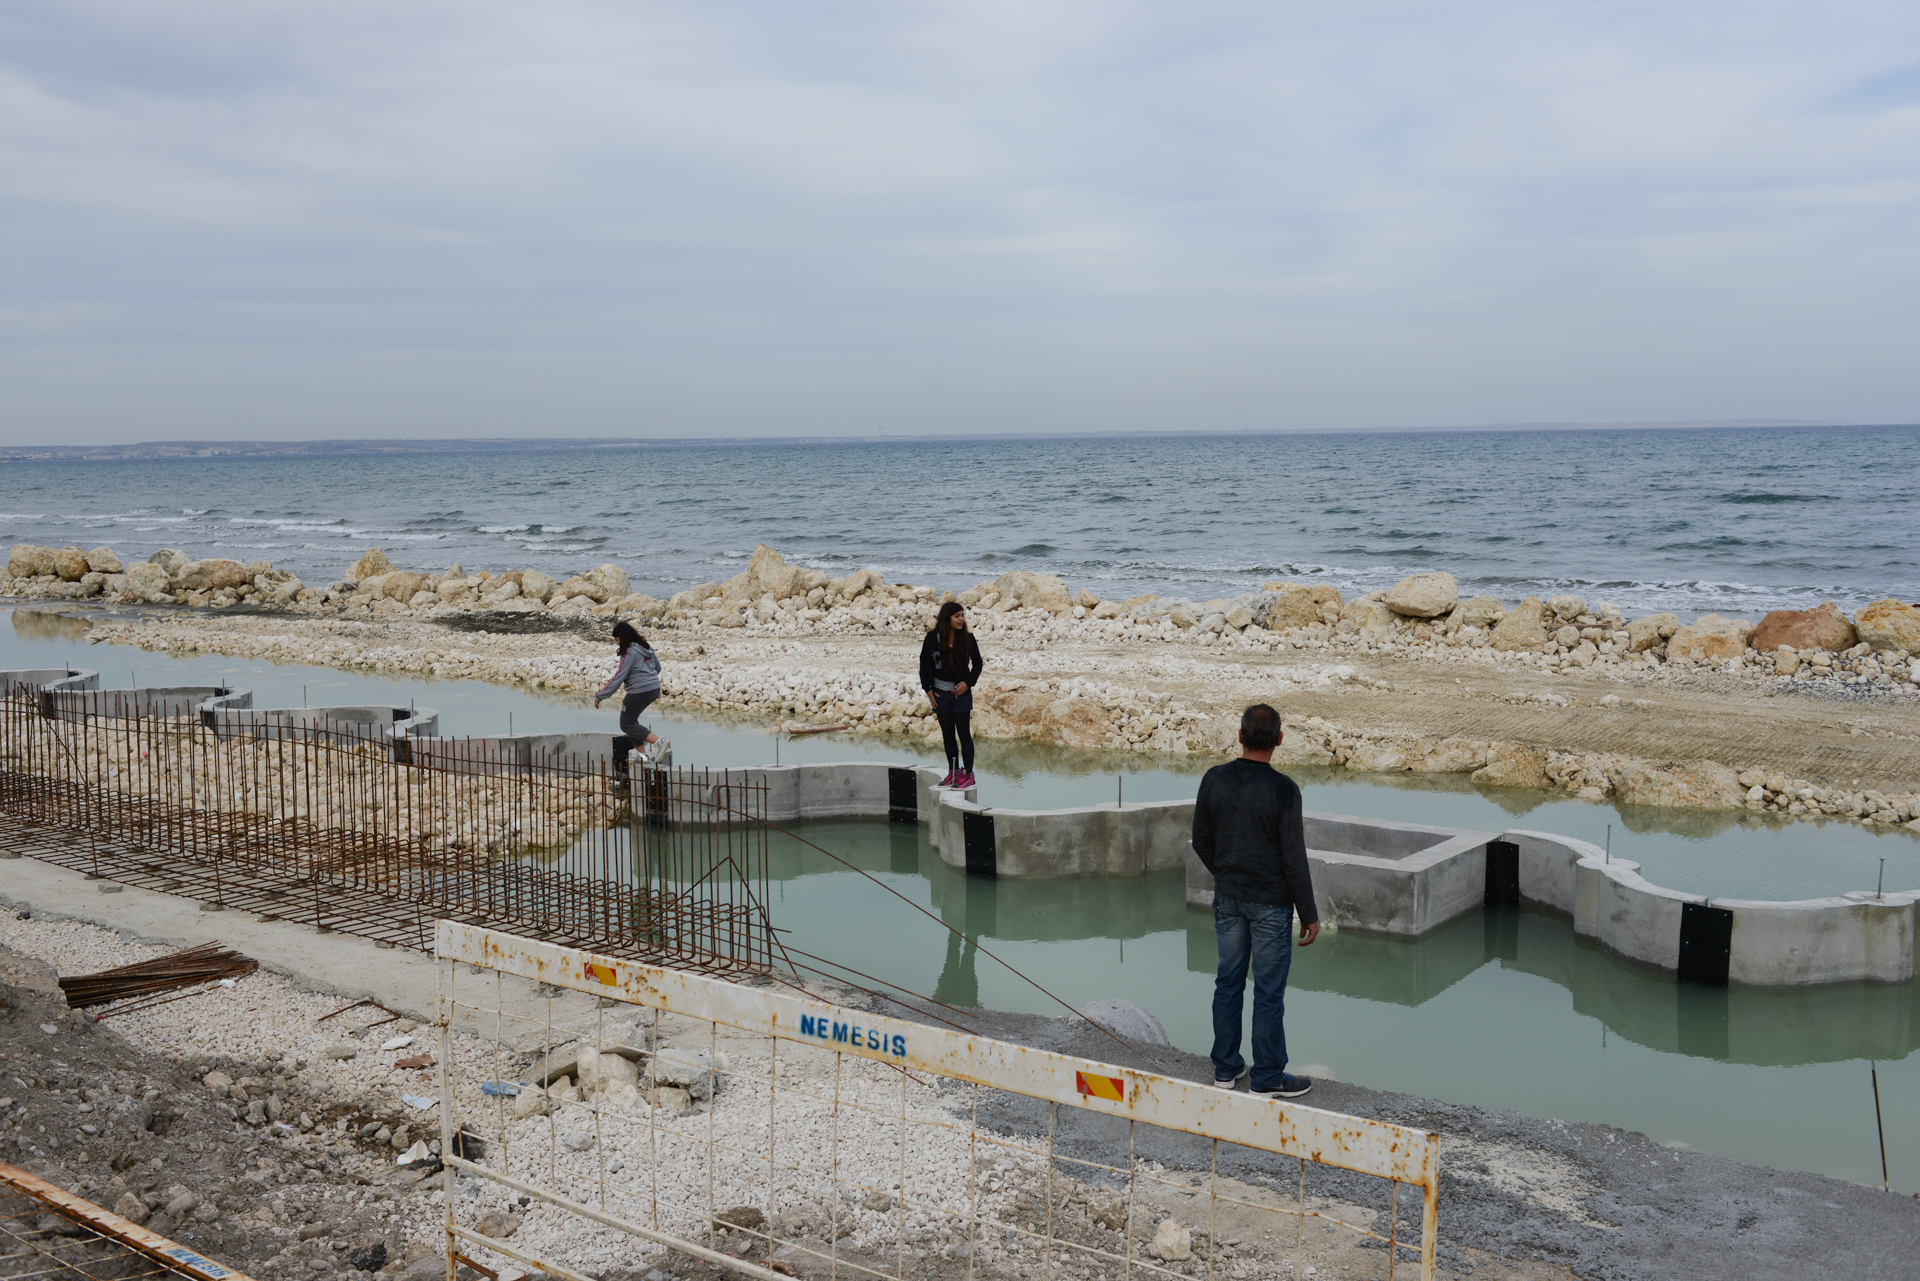 LARNACA, CYPRUS.  People stand on the new break line being used to extend the shoreline out into the sea as it is under construction on March 29, 2013.